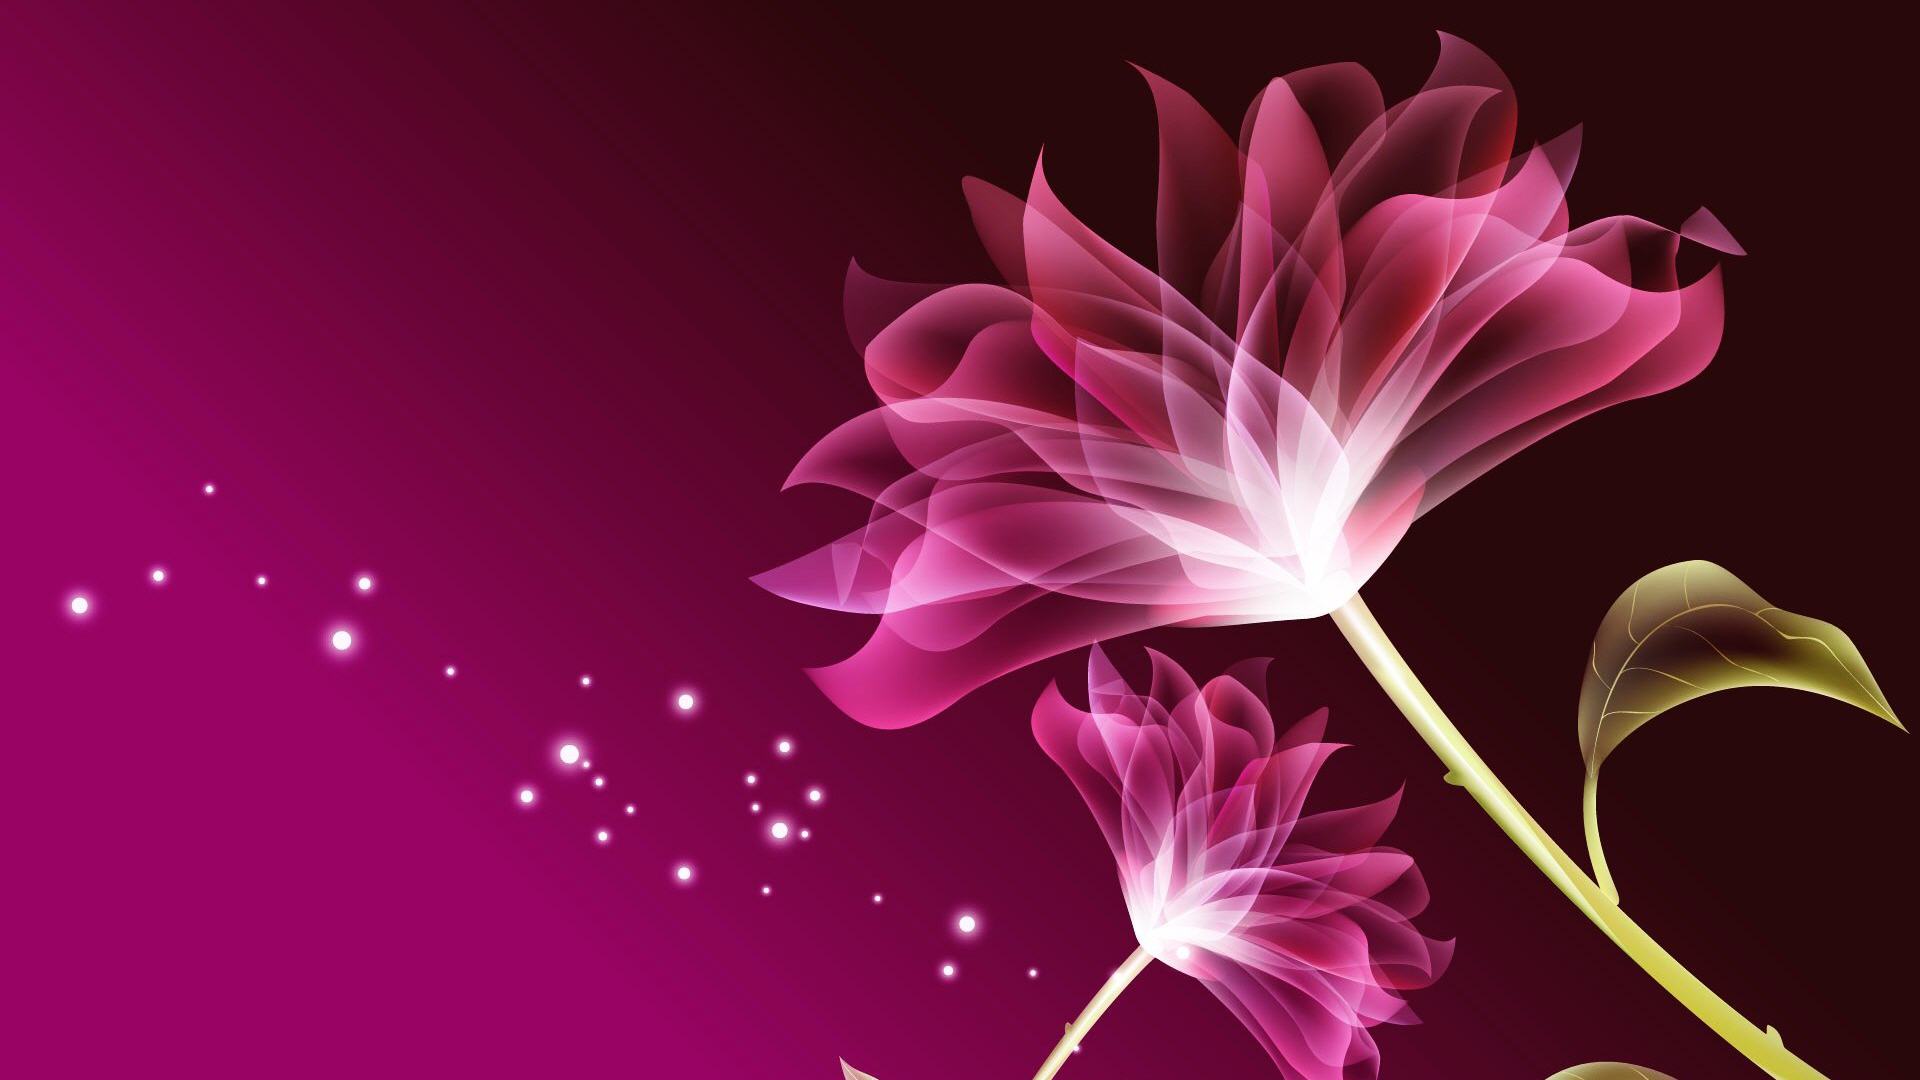 45 HD Beautiful Wallpapers/Backgrounds For Free Download